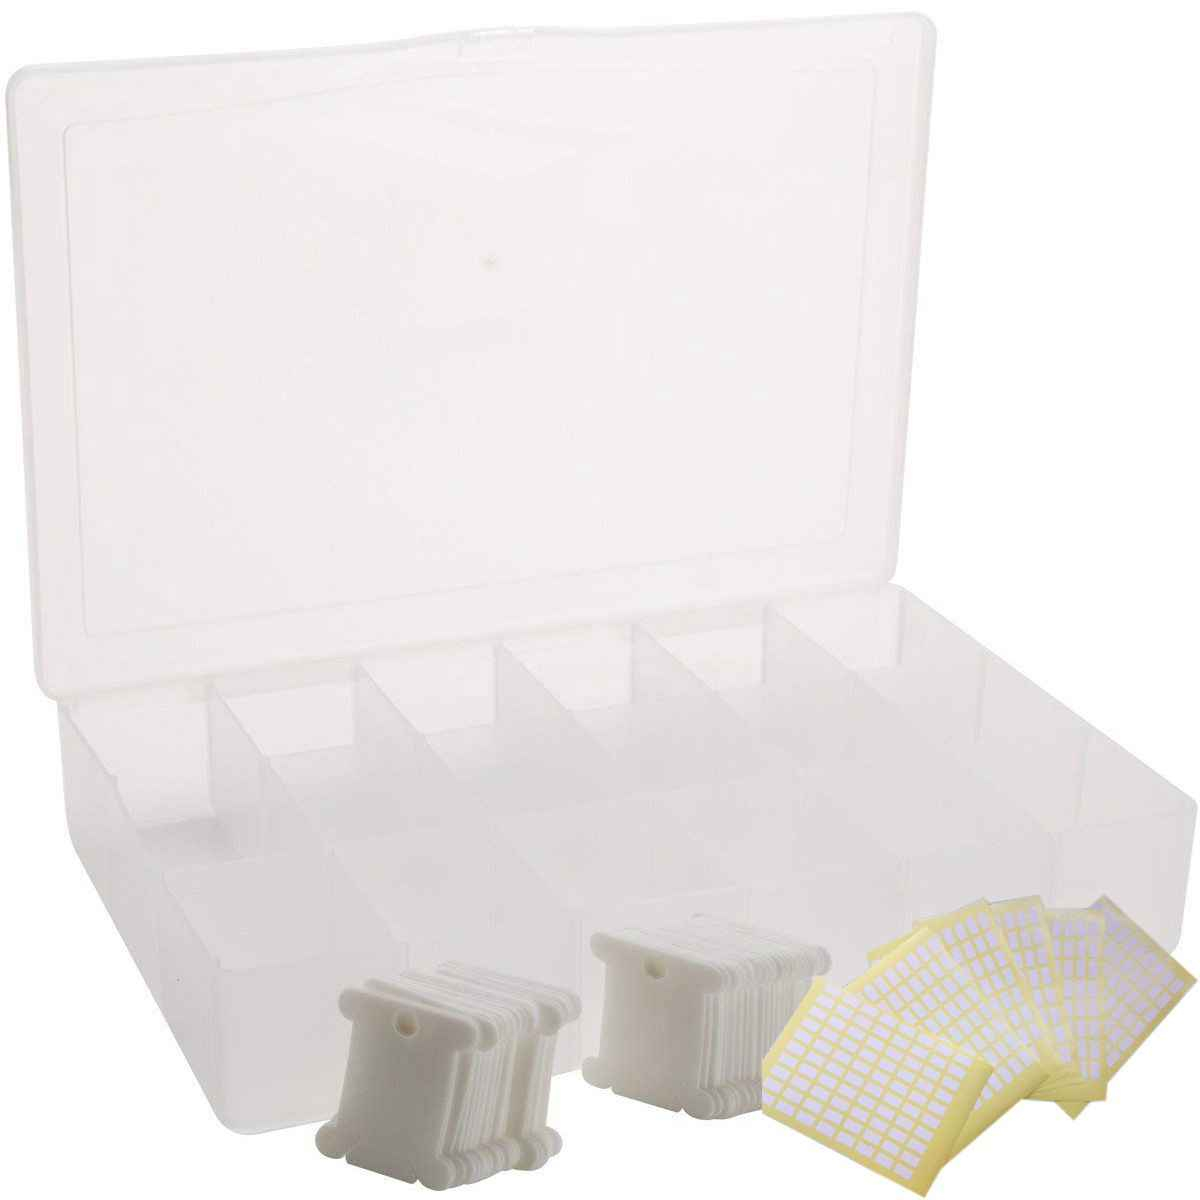 The Floss Box Embroidery Patterns Embroidery Floss Organizer Box 17 Compartments With 100 Hard Plastic Floss Bobbins And 480 Floss Number Stickers Full Set